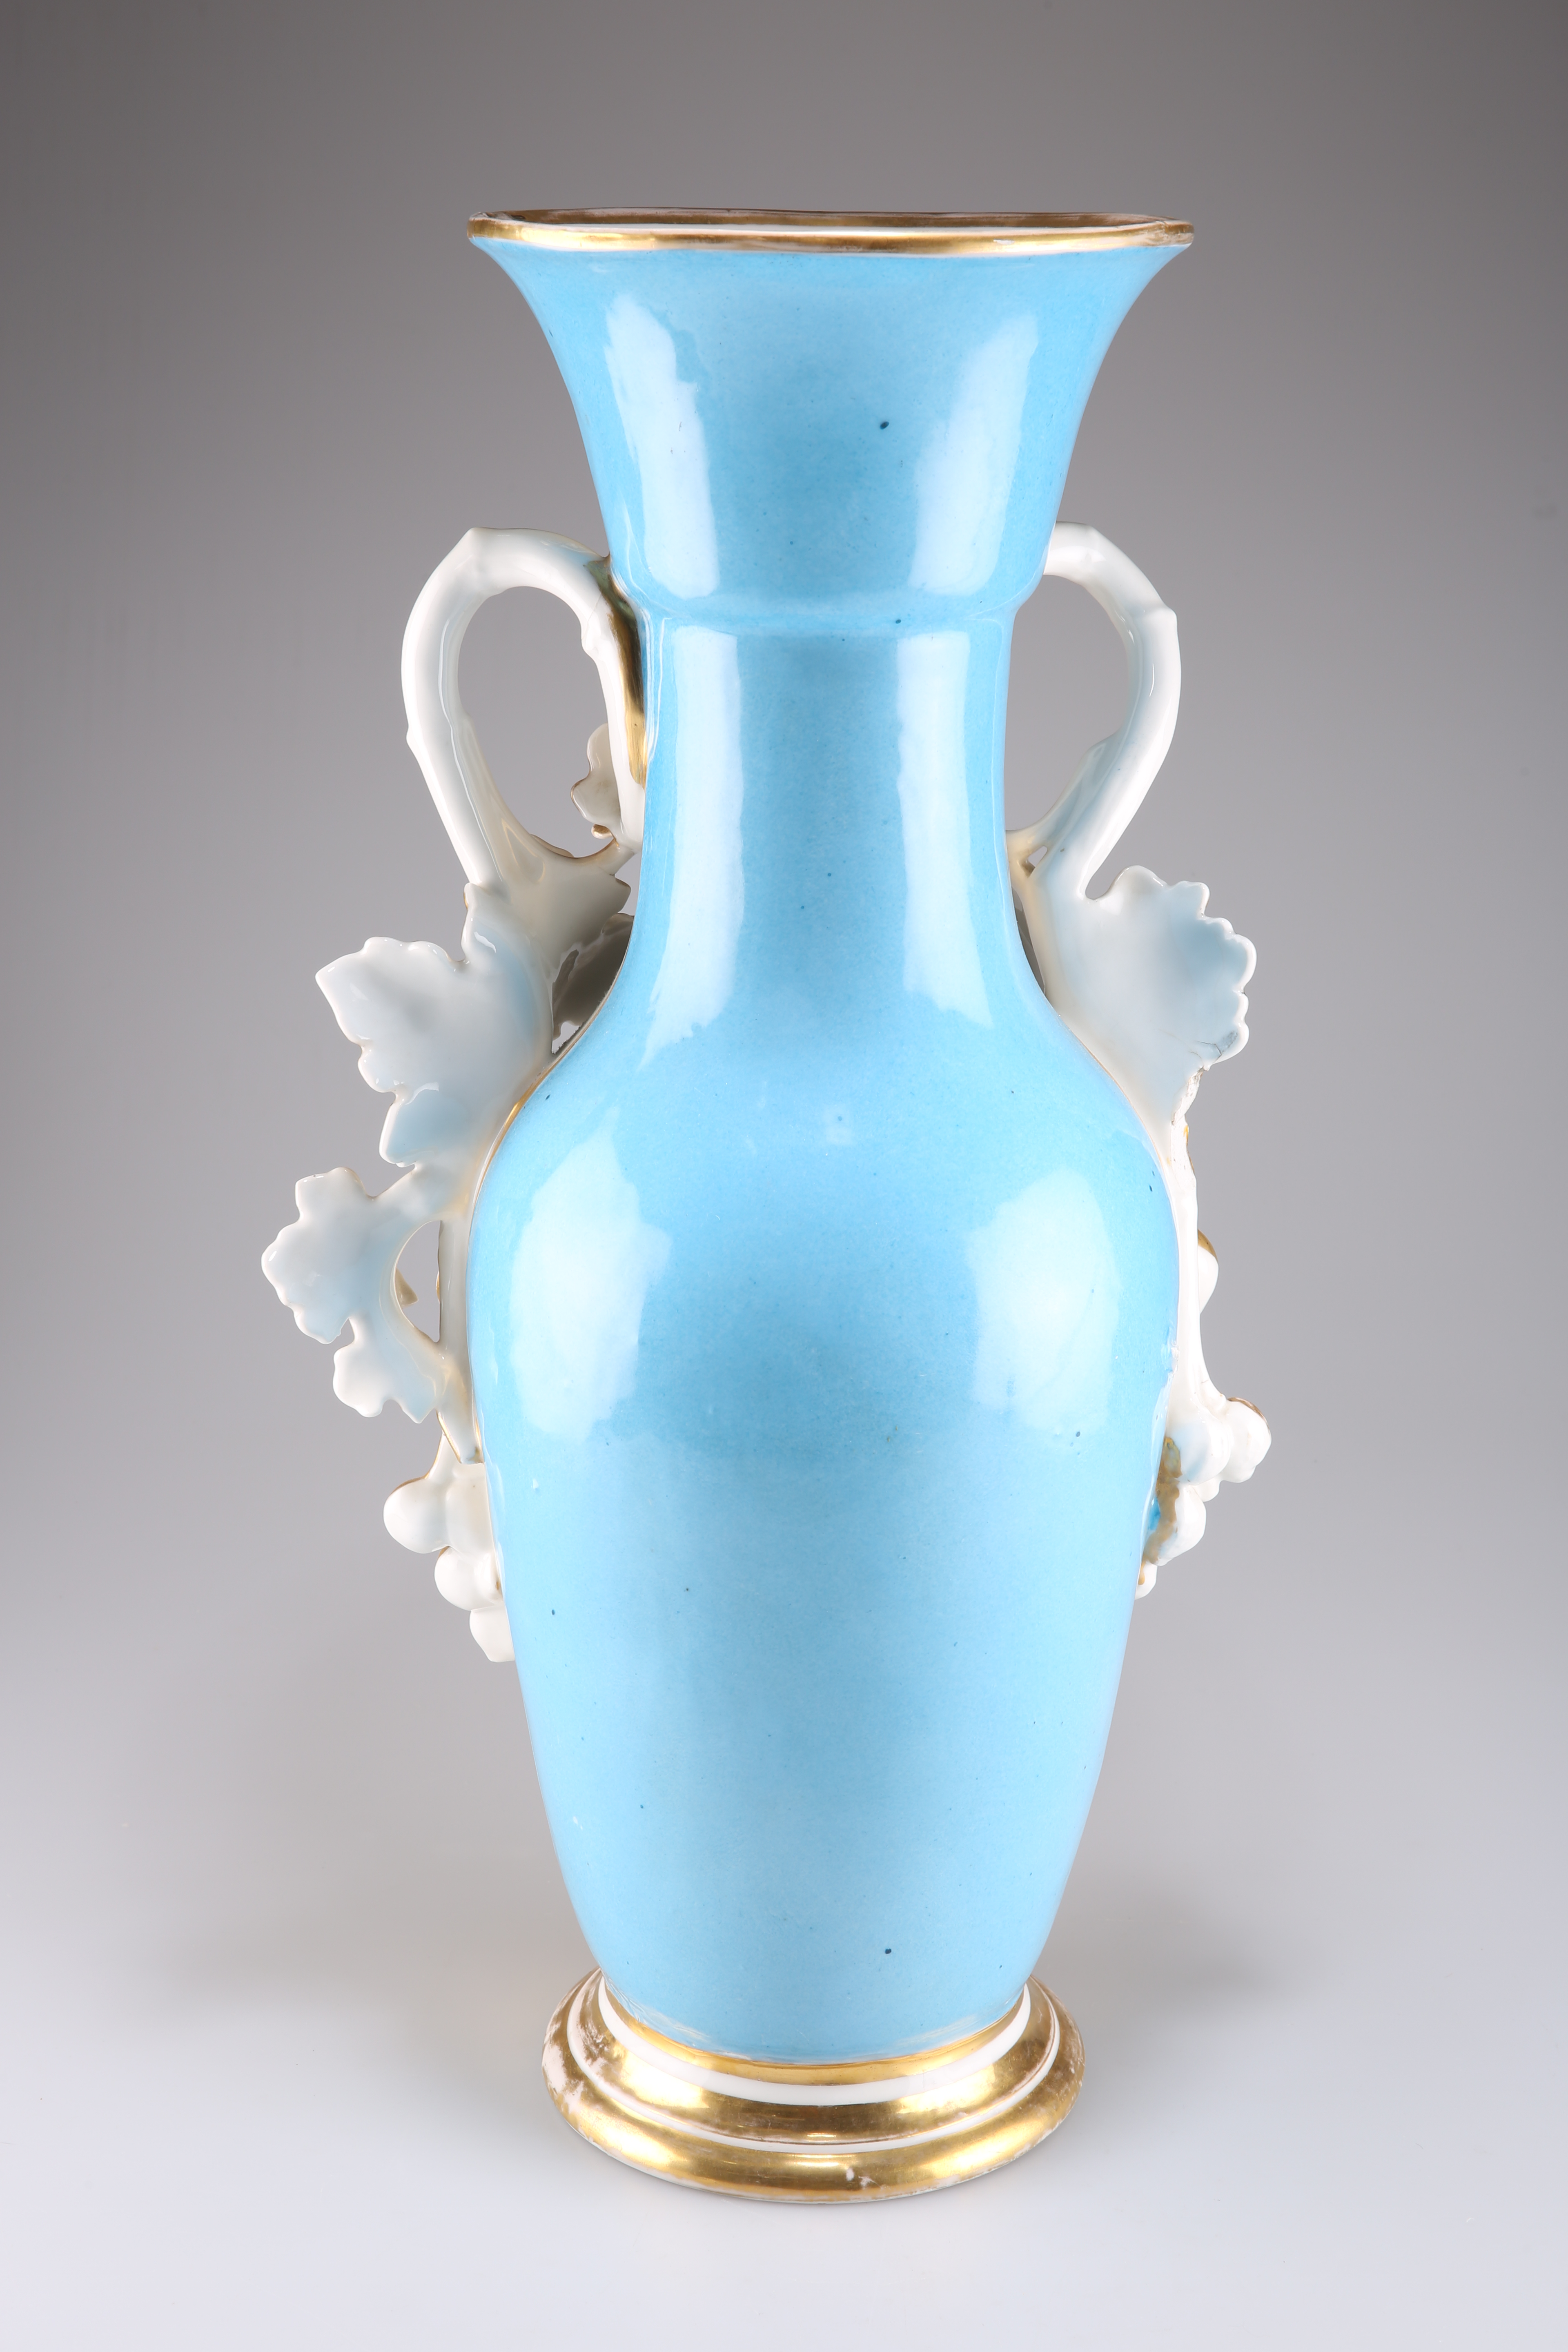 A FRENCH PORCELAIN VASE, MID-19TH CENTURY - Image 2 of 2